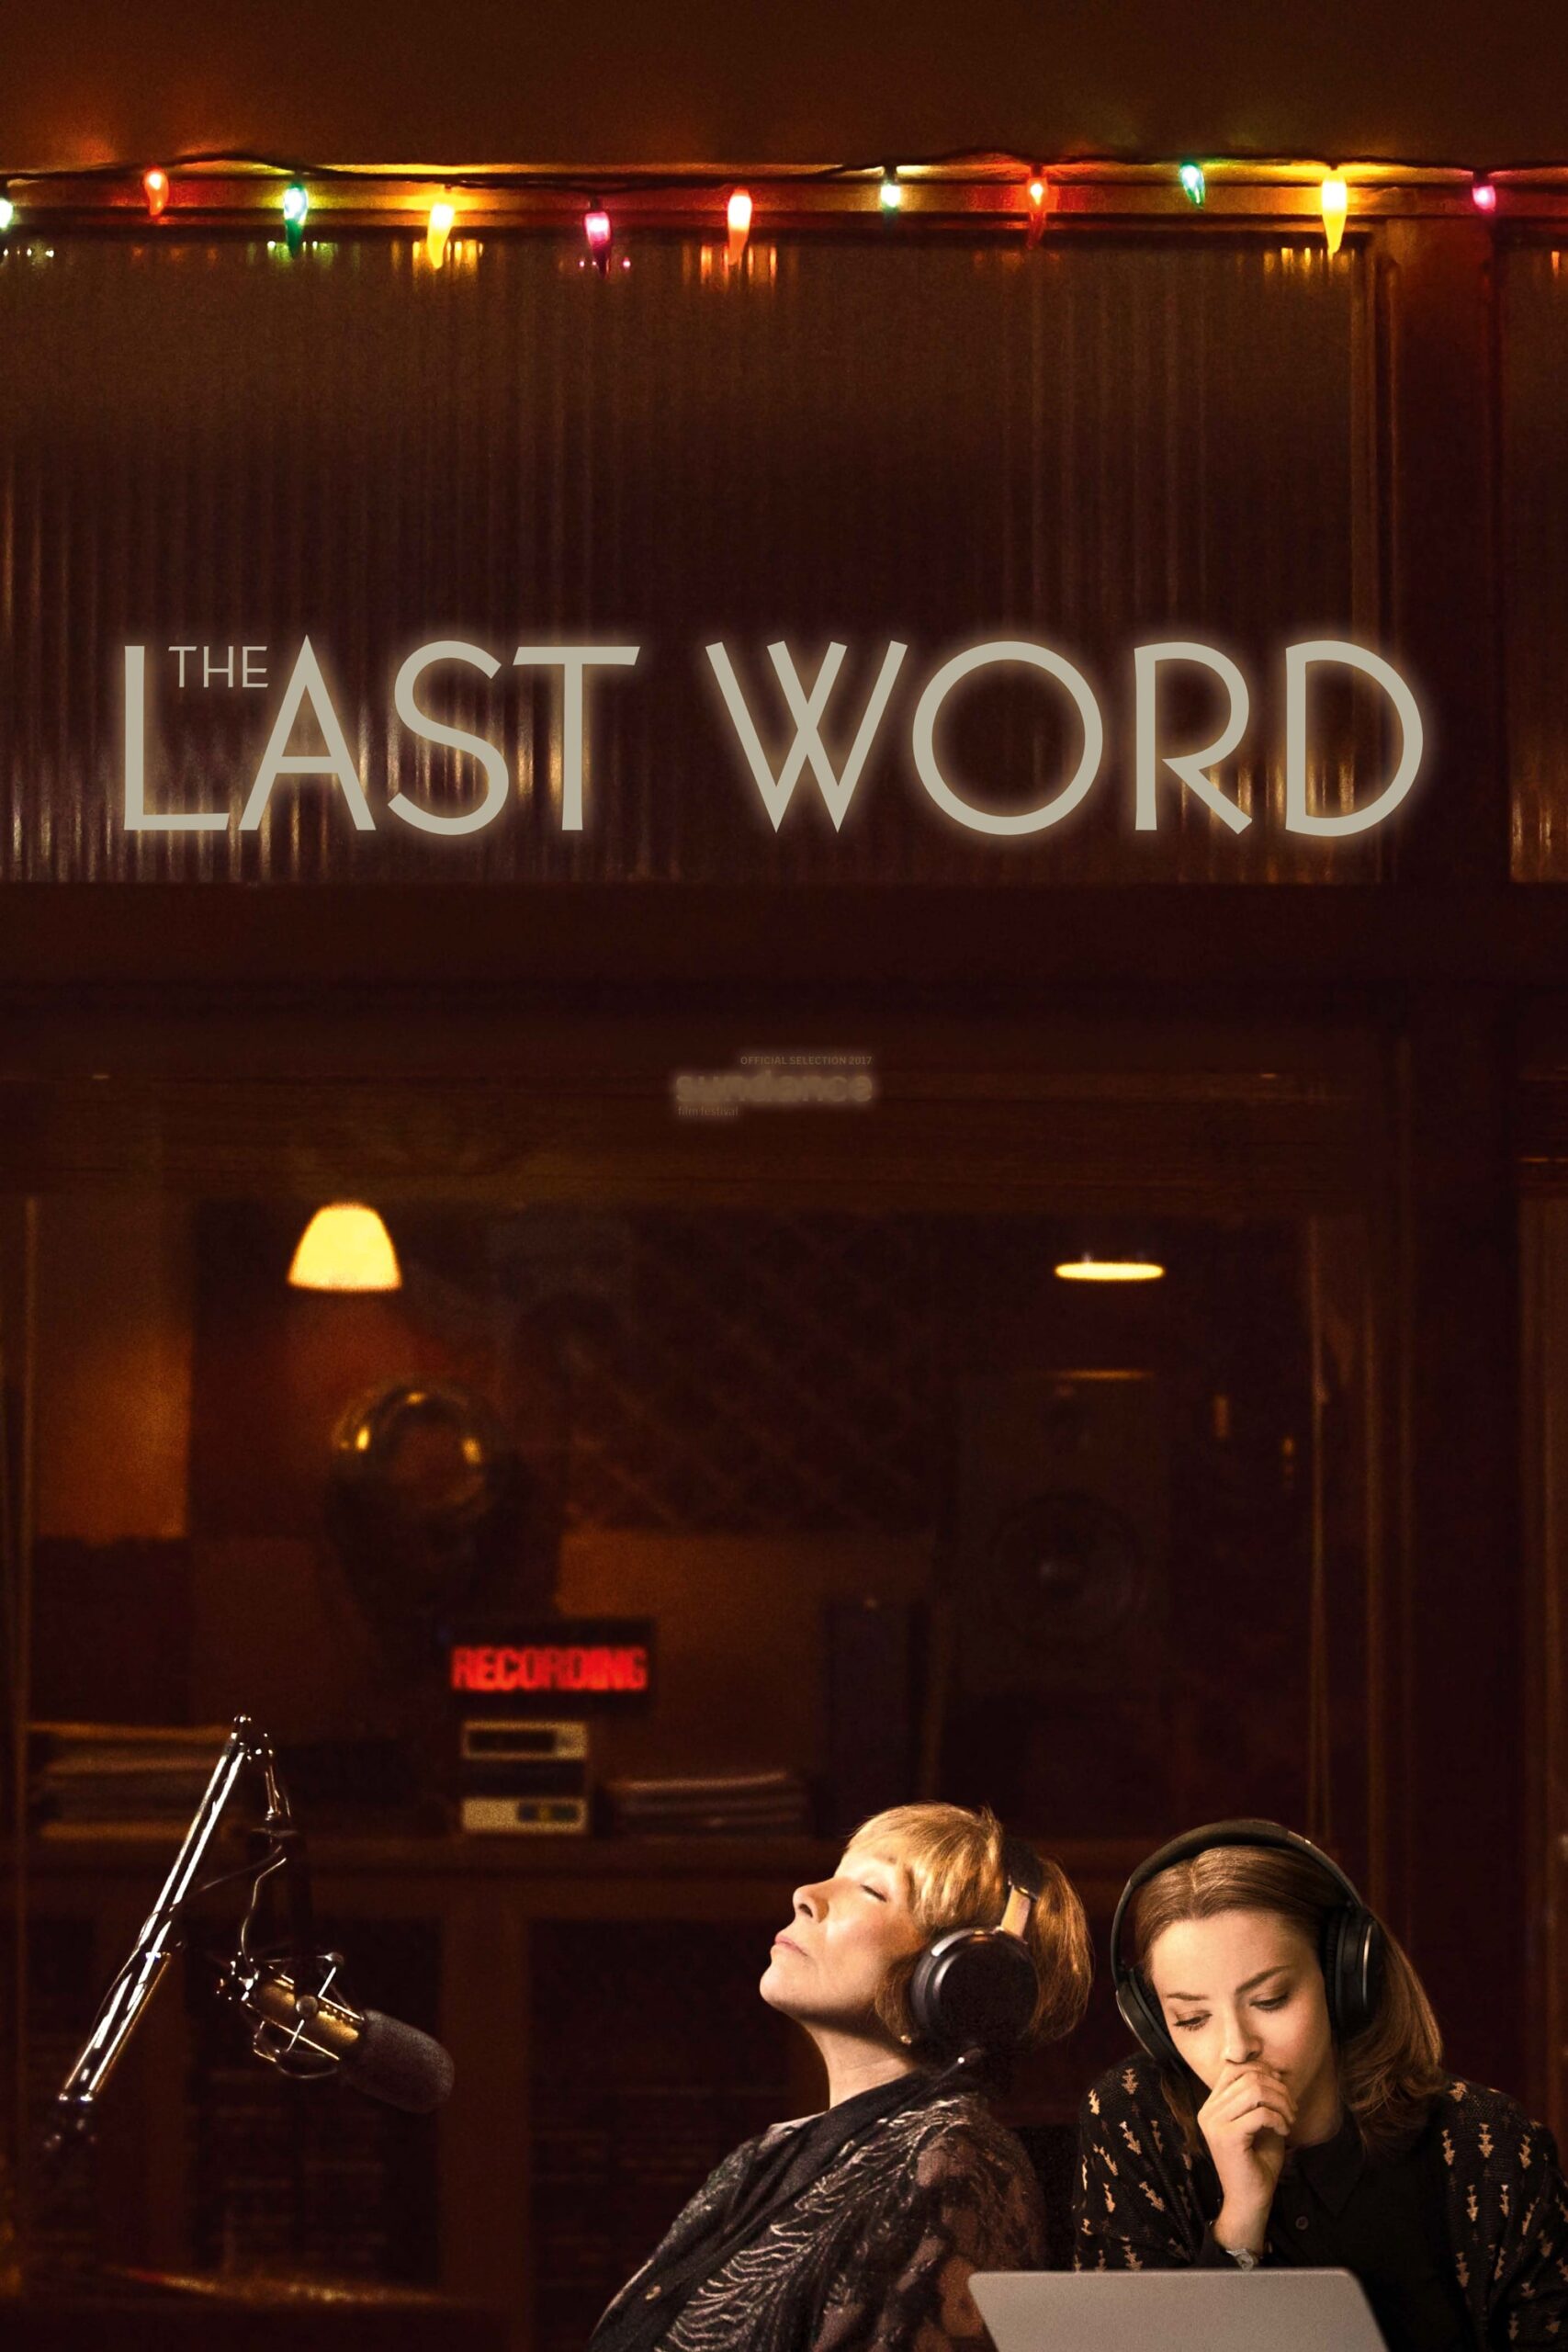 Poster for the movie "The Last Word"